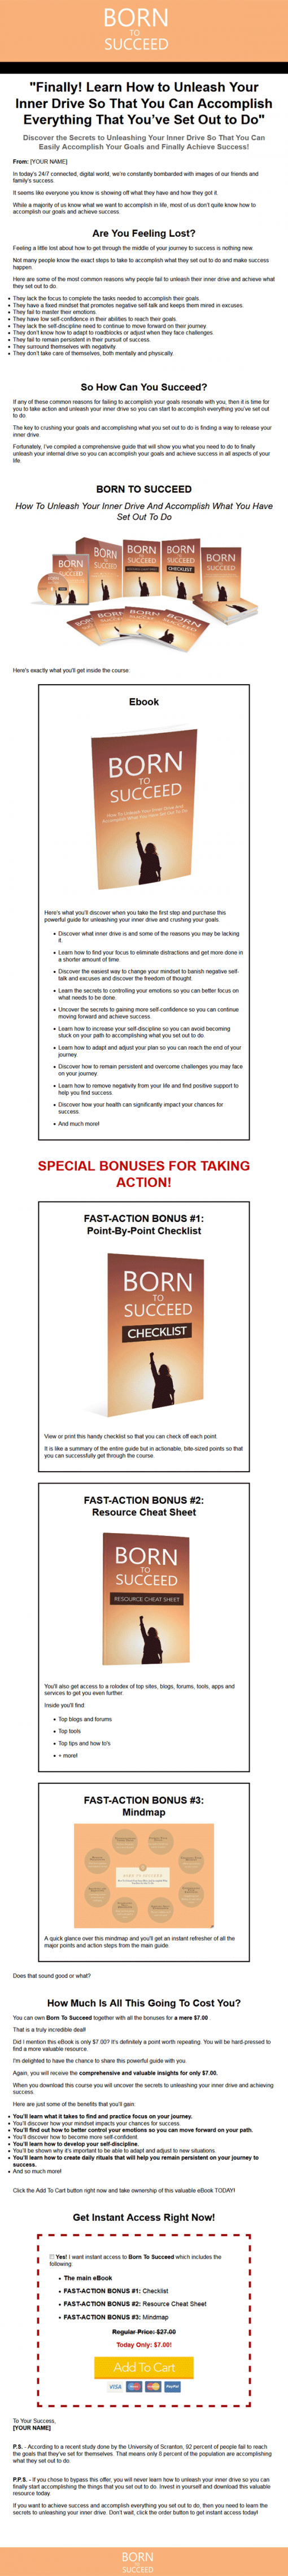 Born To Succeed Ebook and Videos MRR